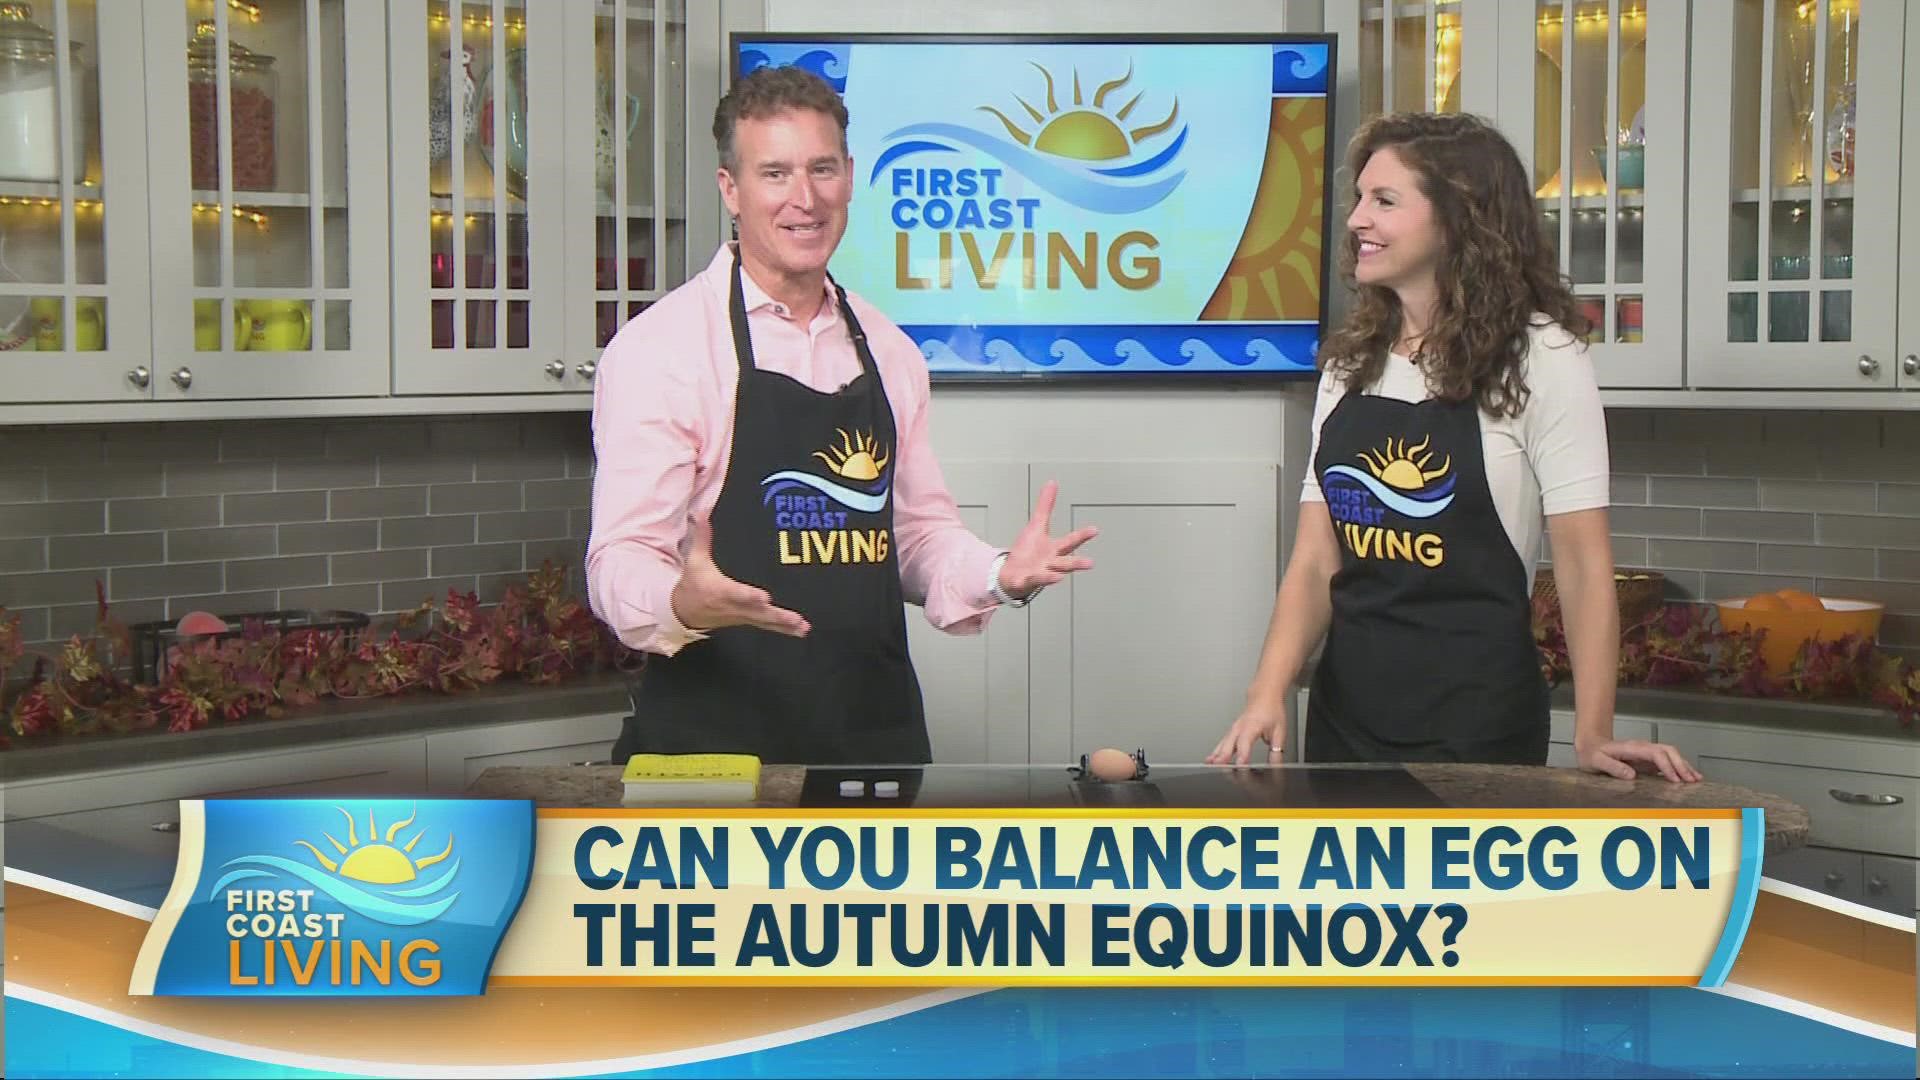 We are all excited for our sunny and cooler days ahead but can you really celebrate fall by balancing an egg?